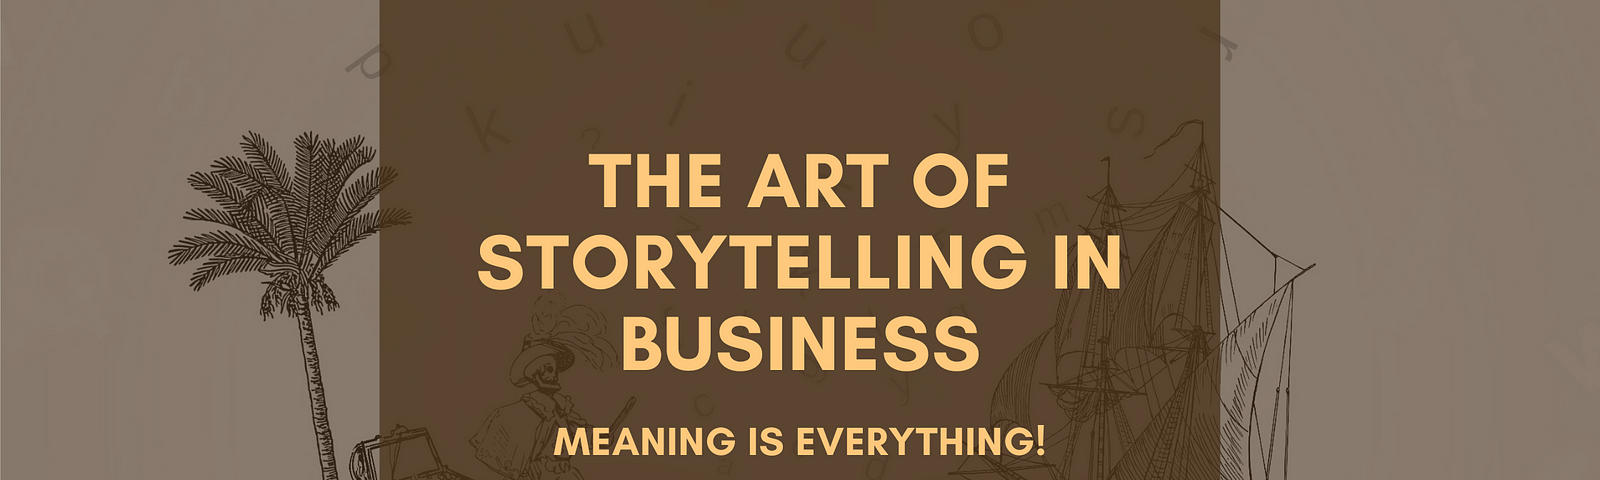 The Art of Storytelling in Business